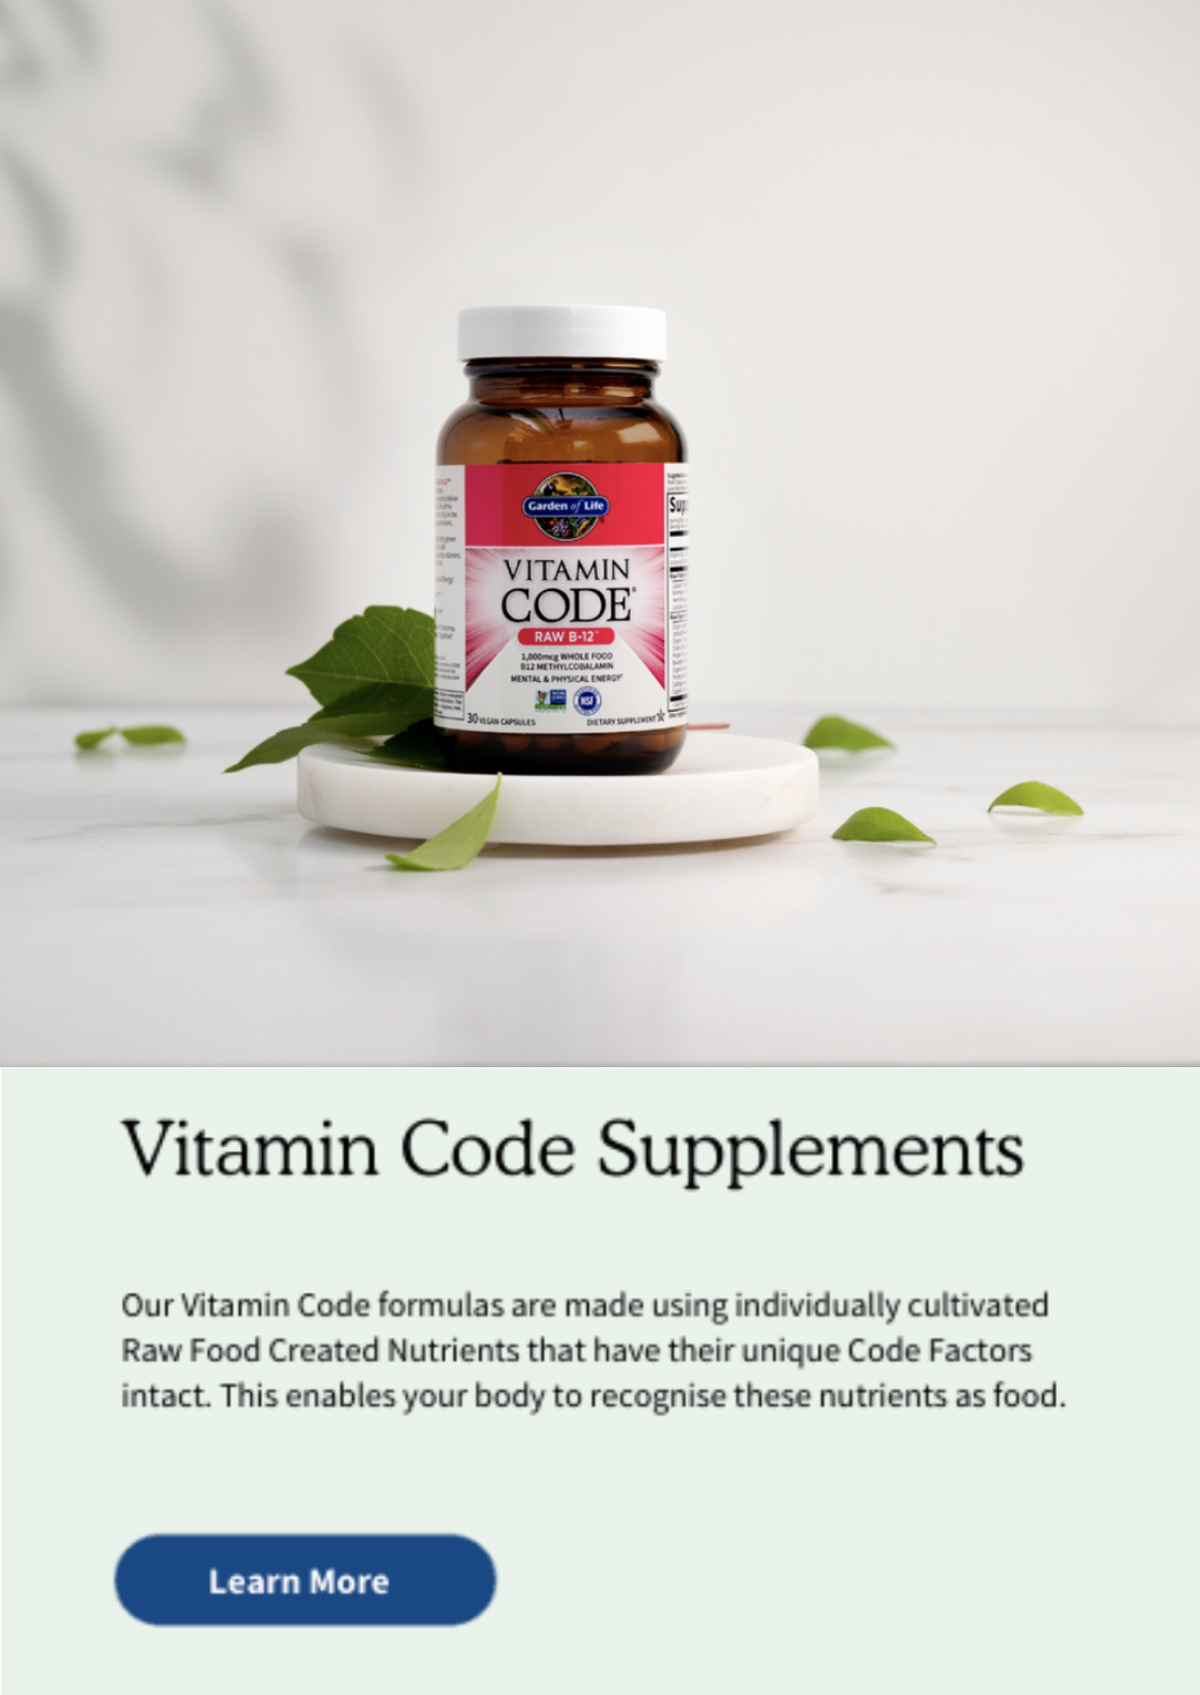 Vitamin Code Supplements. Our Vitamin Code formulas are made using individually cultivated Raw Food Created Nutrients that have their unique Code Factors intact. This enables your body to recognise these nutrients as food.